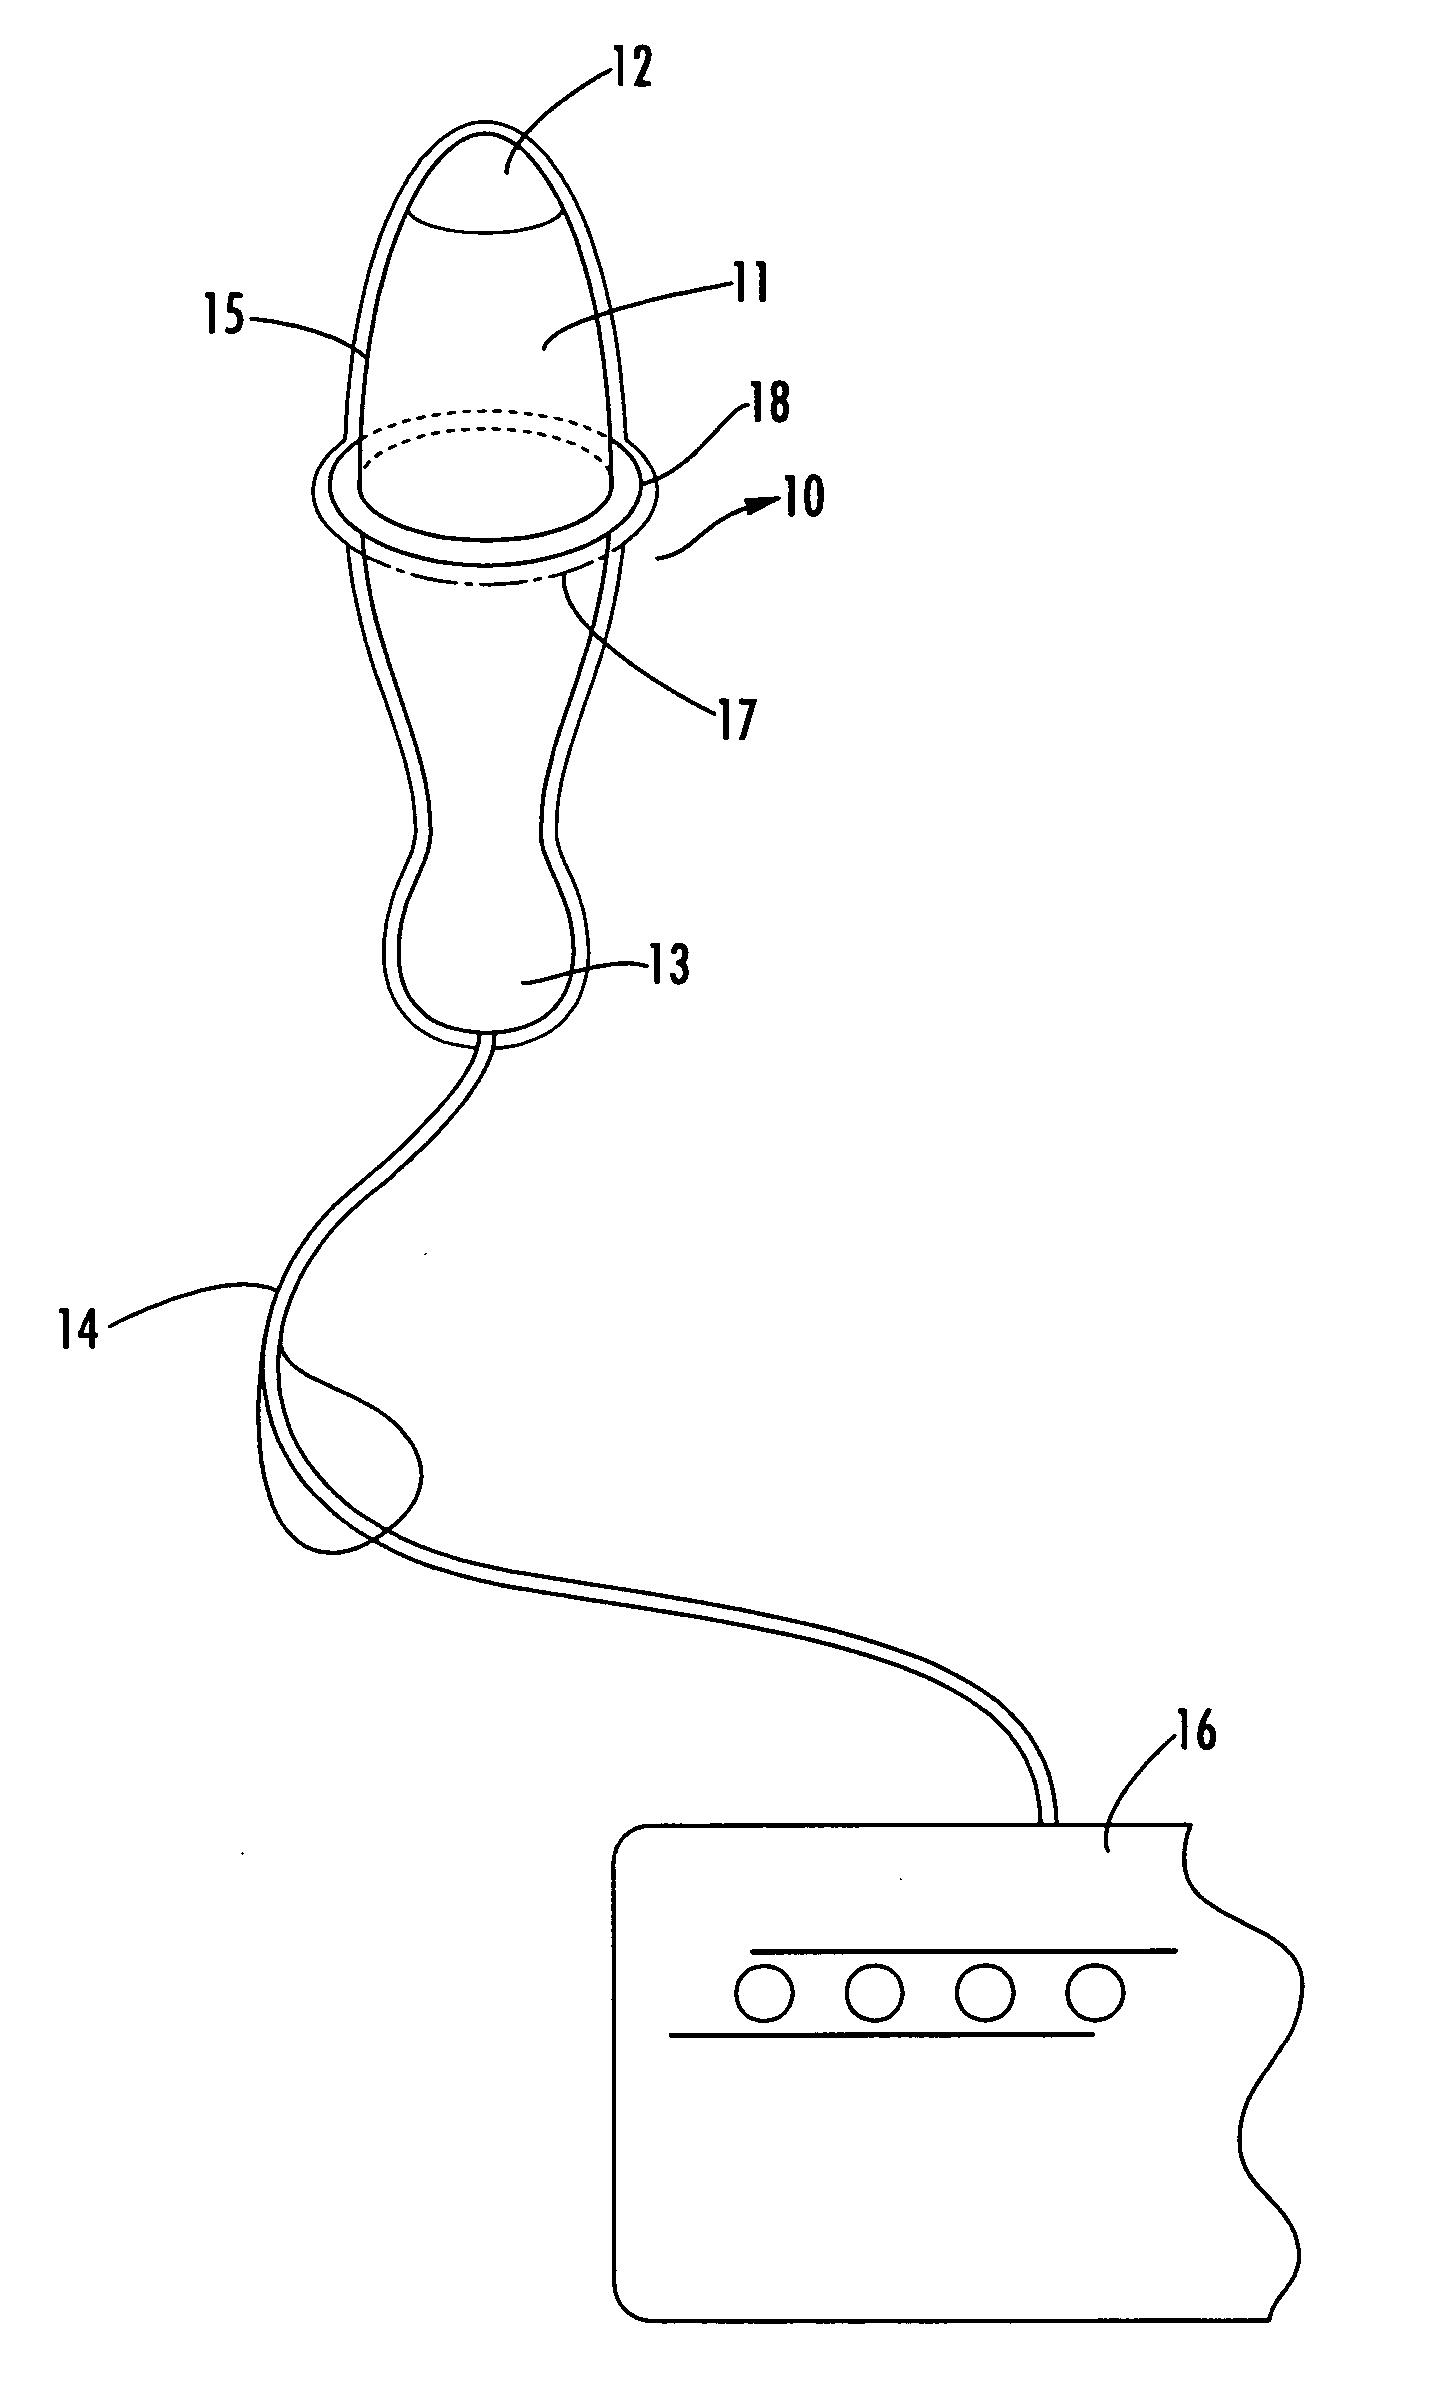 Pelvic muscle exercise device